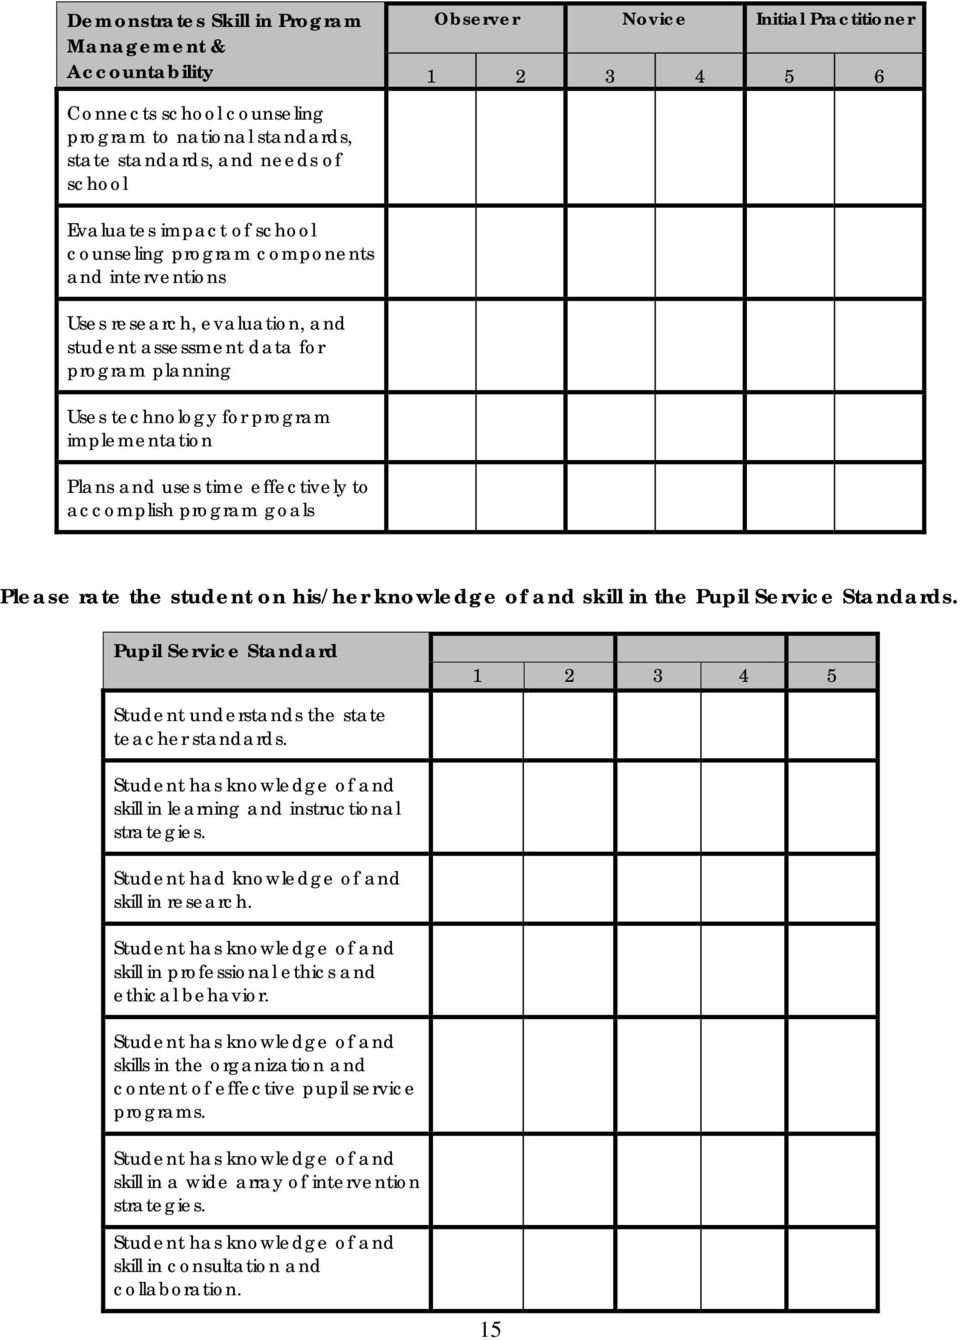 implementation Plans and uses time effectively to accomplish program goals Please rate the student on his/her knowledge of and skill in the Pupil Service Standards.